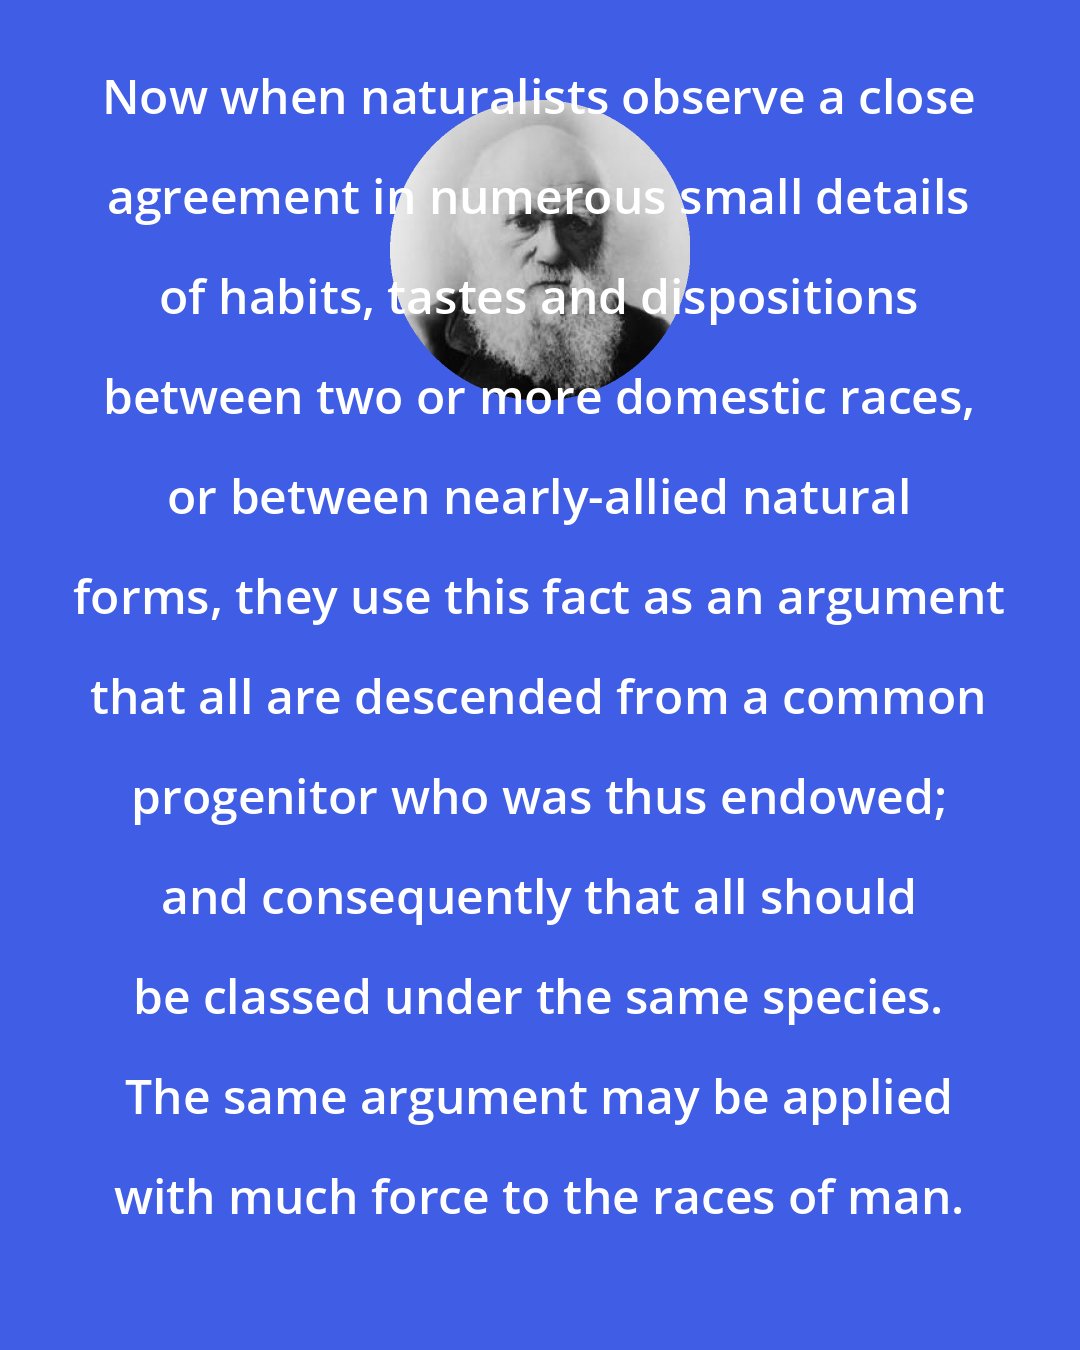 Charles Darwin: Now when naturalists observe a close agreement in numerous small details of habits, tastes and dispositions between two or more domestic races, or between nearly-allied natural forms, they use this fact as an argument that all are descended from a common progenitor who was thus endowed; and consequently that all should be classed under the same species. The same argument may be applied with much force to the races of man.